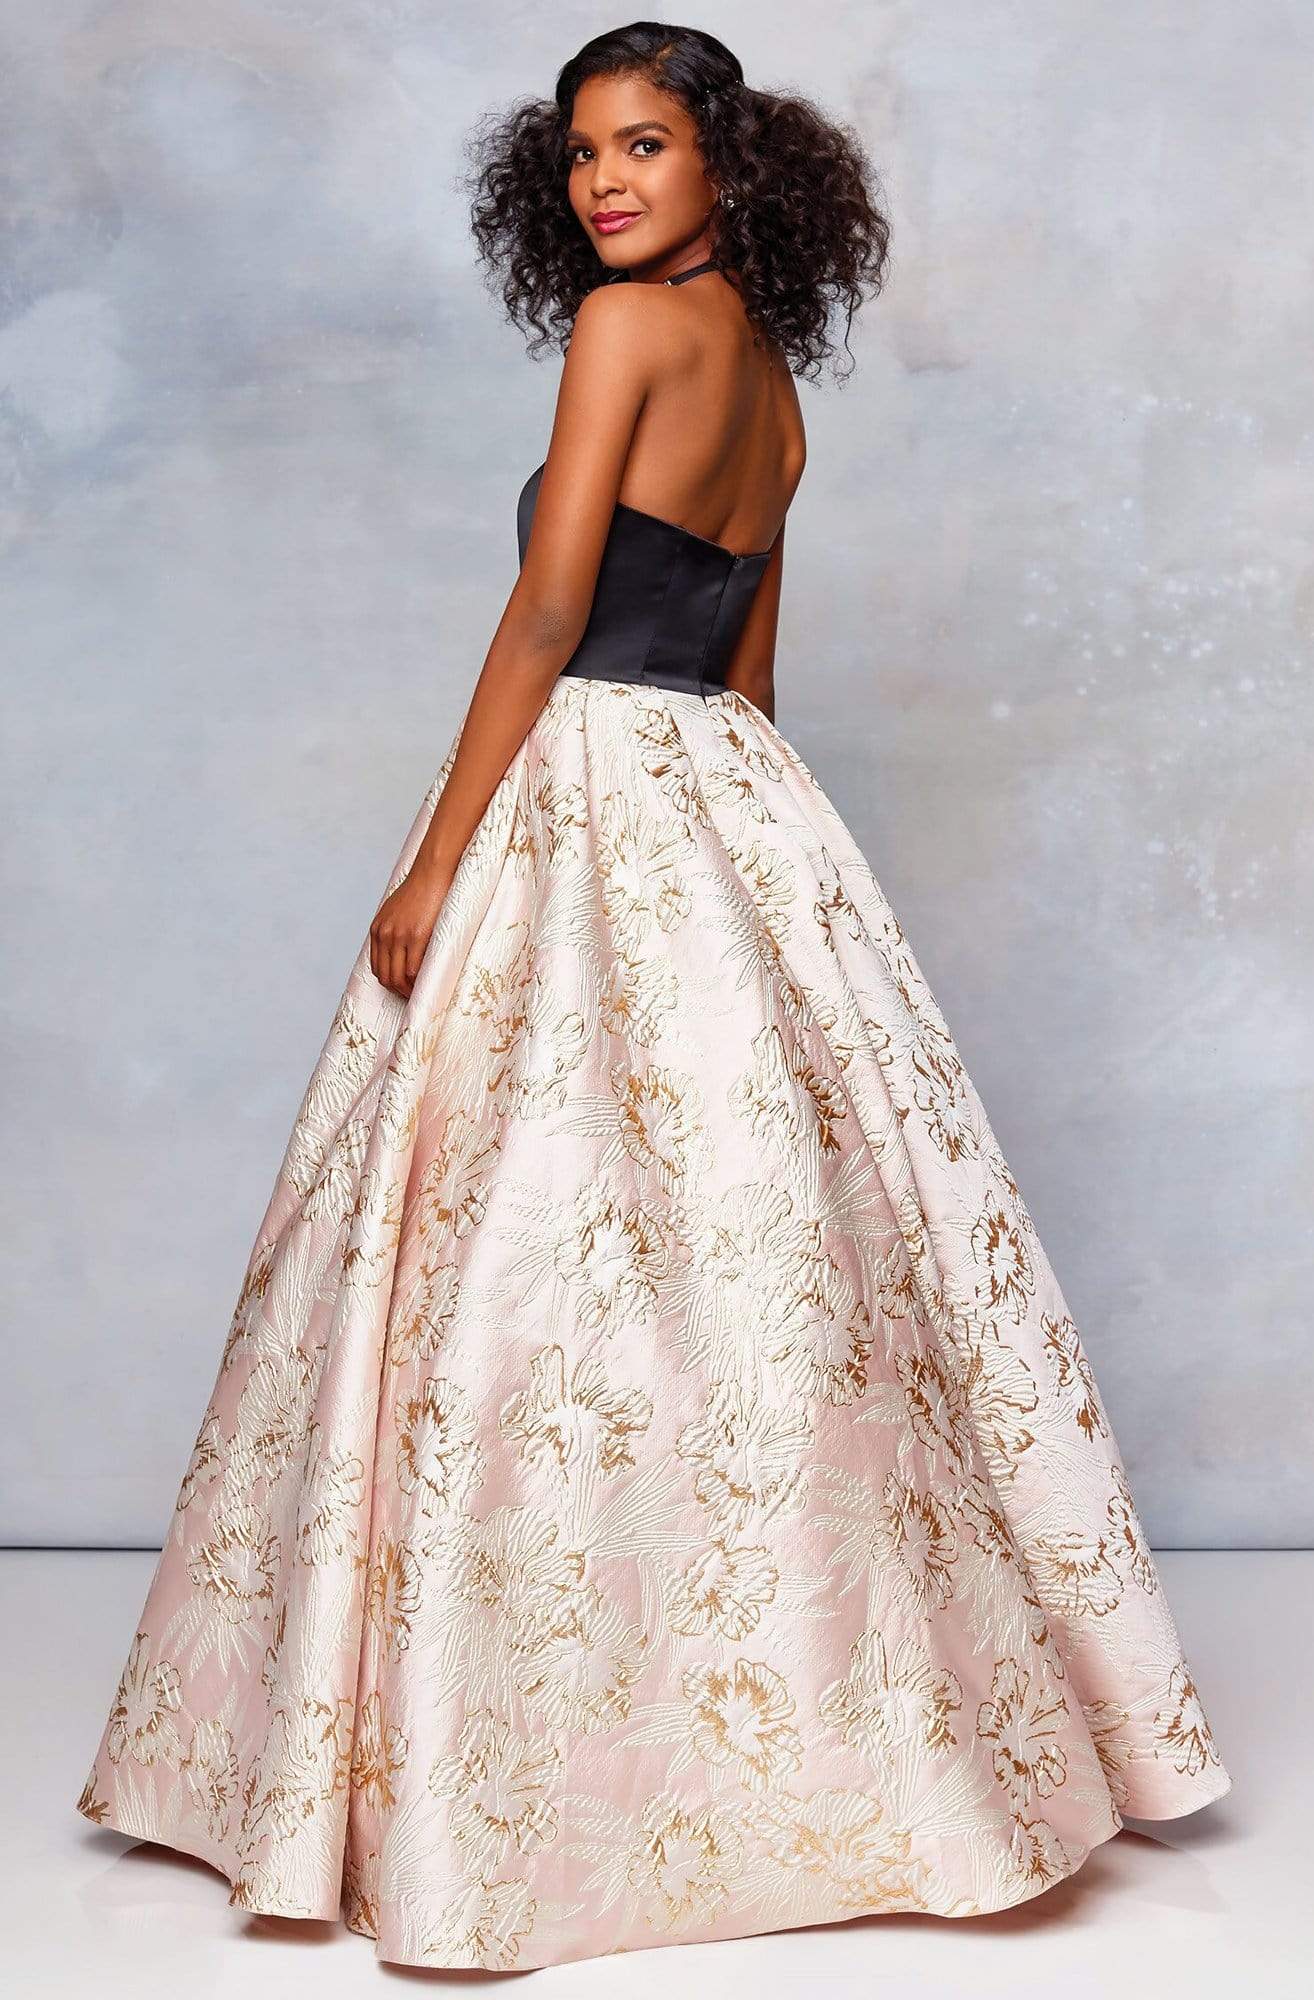 Clarisse - 5032 Two Tone Satin Sweetheart Brocade Ballgown Special Occasion Dress